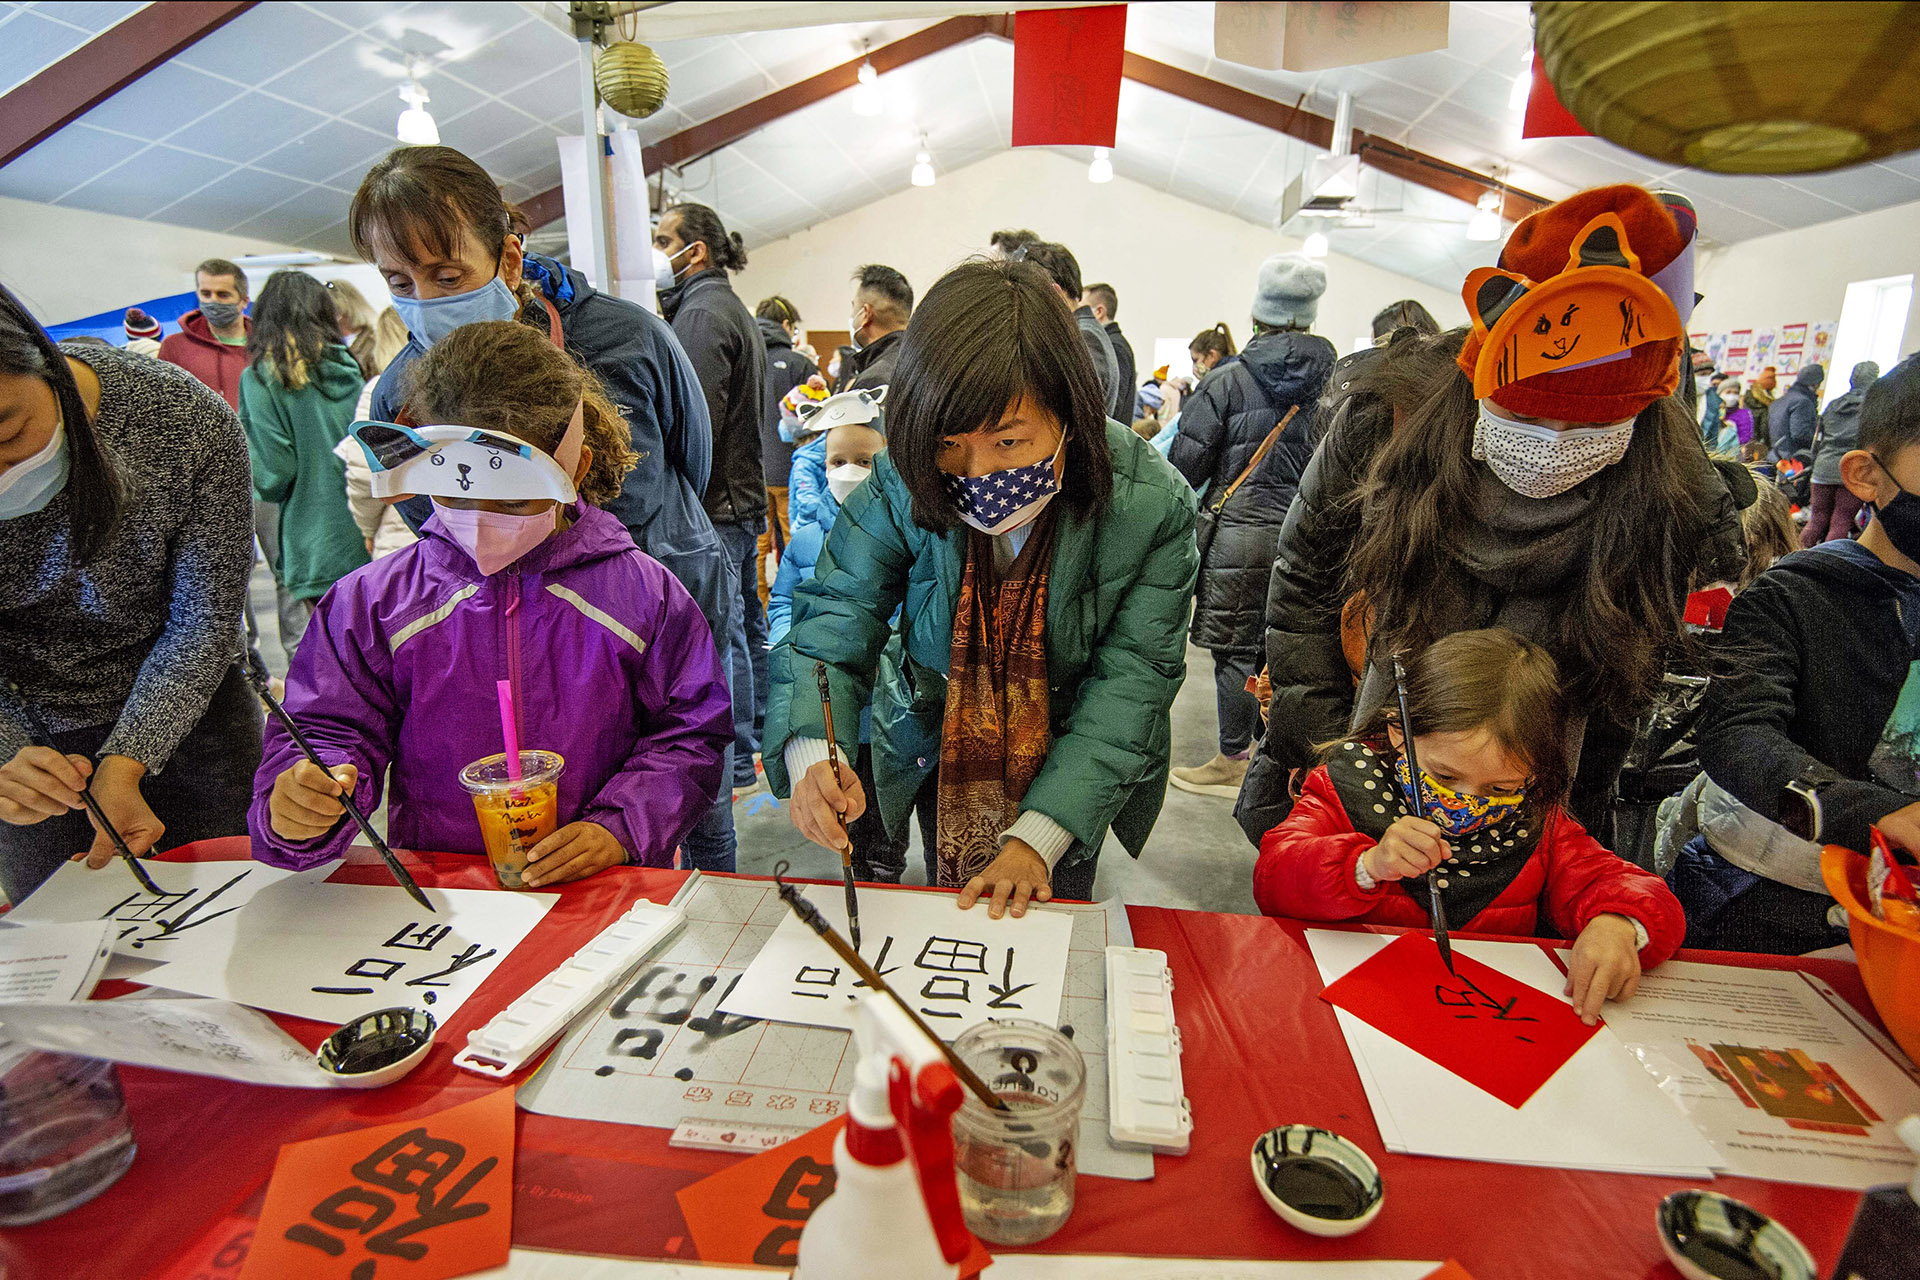 People paint at the China passport station during the Lunar New Year Celebration at Legacy Park in Decatur on Saturday, Jan. 29. 2022. Photo by Dean Hesse.